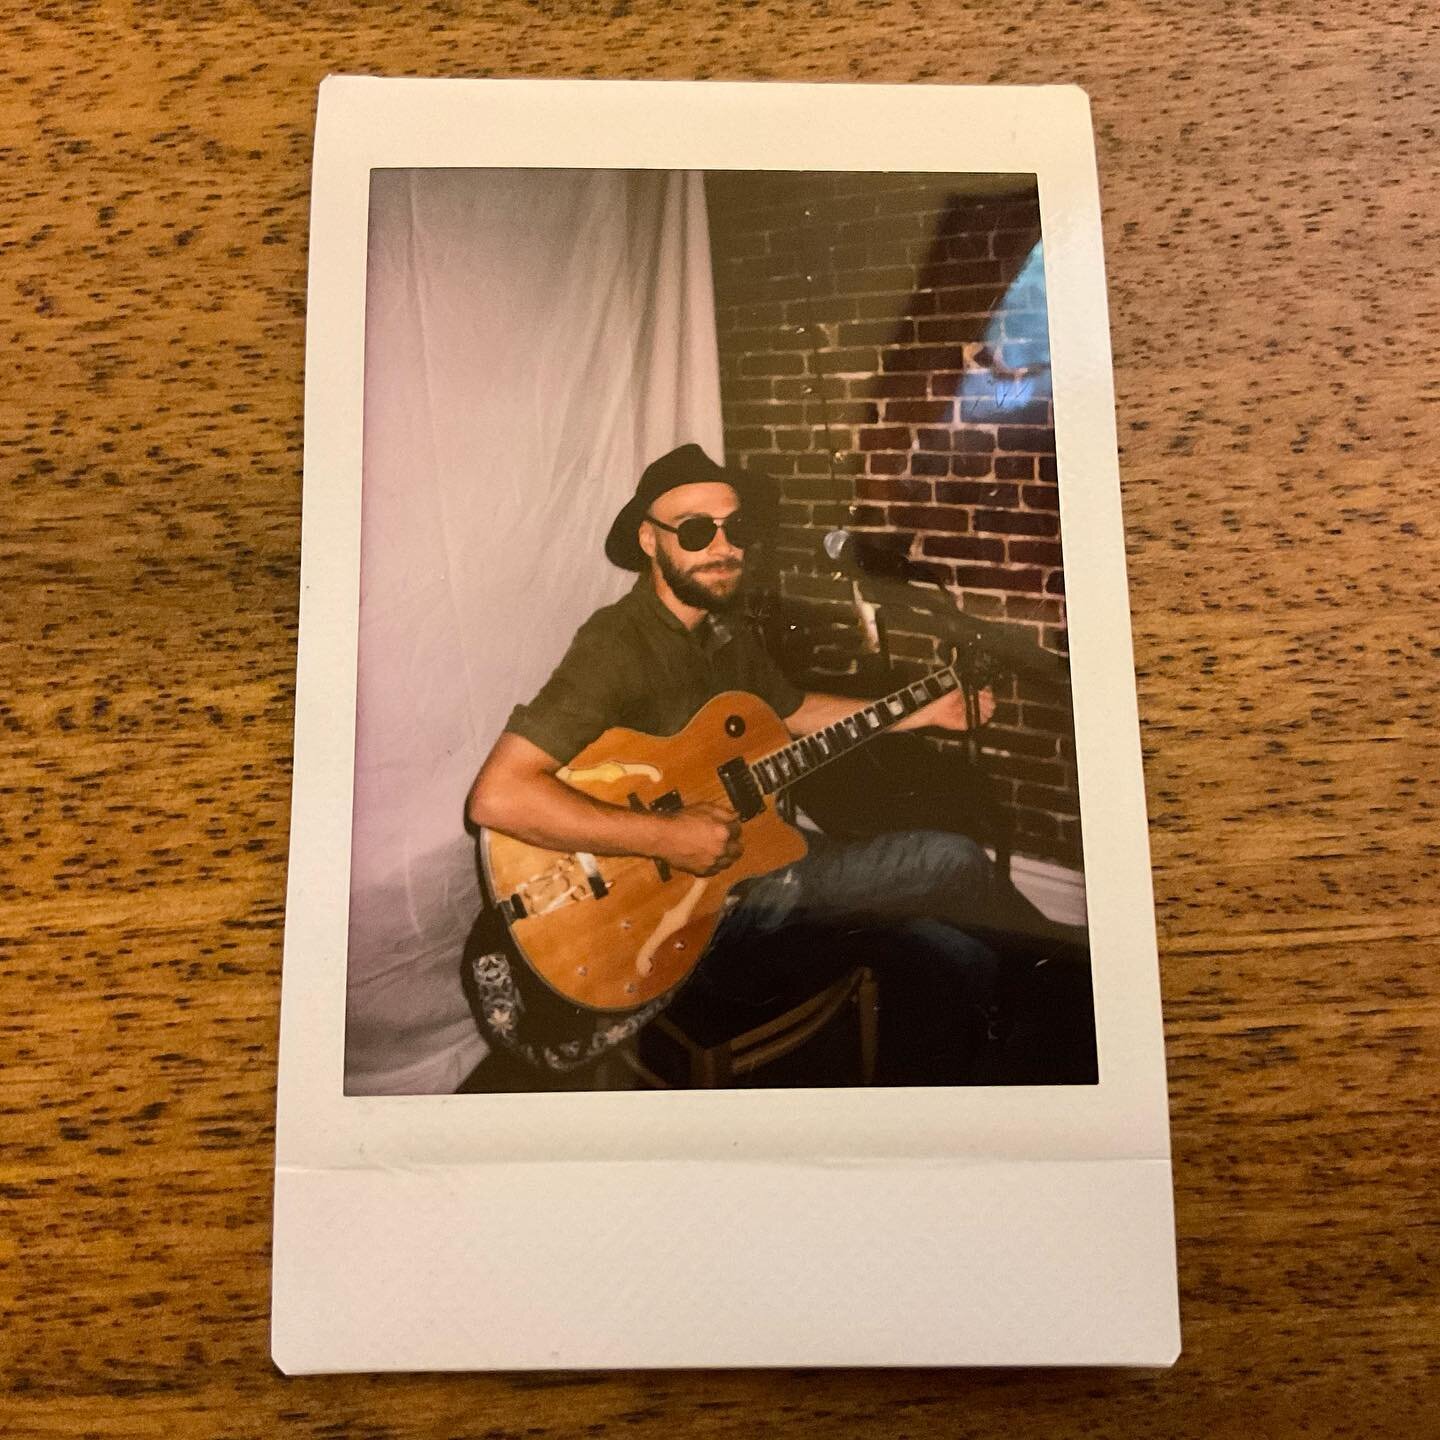 Coffee shop gig from a few months ago. Had to wear shades. This felt like a real &ldquo;concert&rdquo;, where they hang on your every word... loved it. Thank you to @coastlesscreatives #polaroid #denvermusic